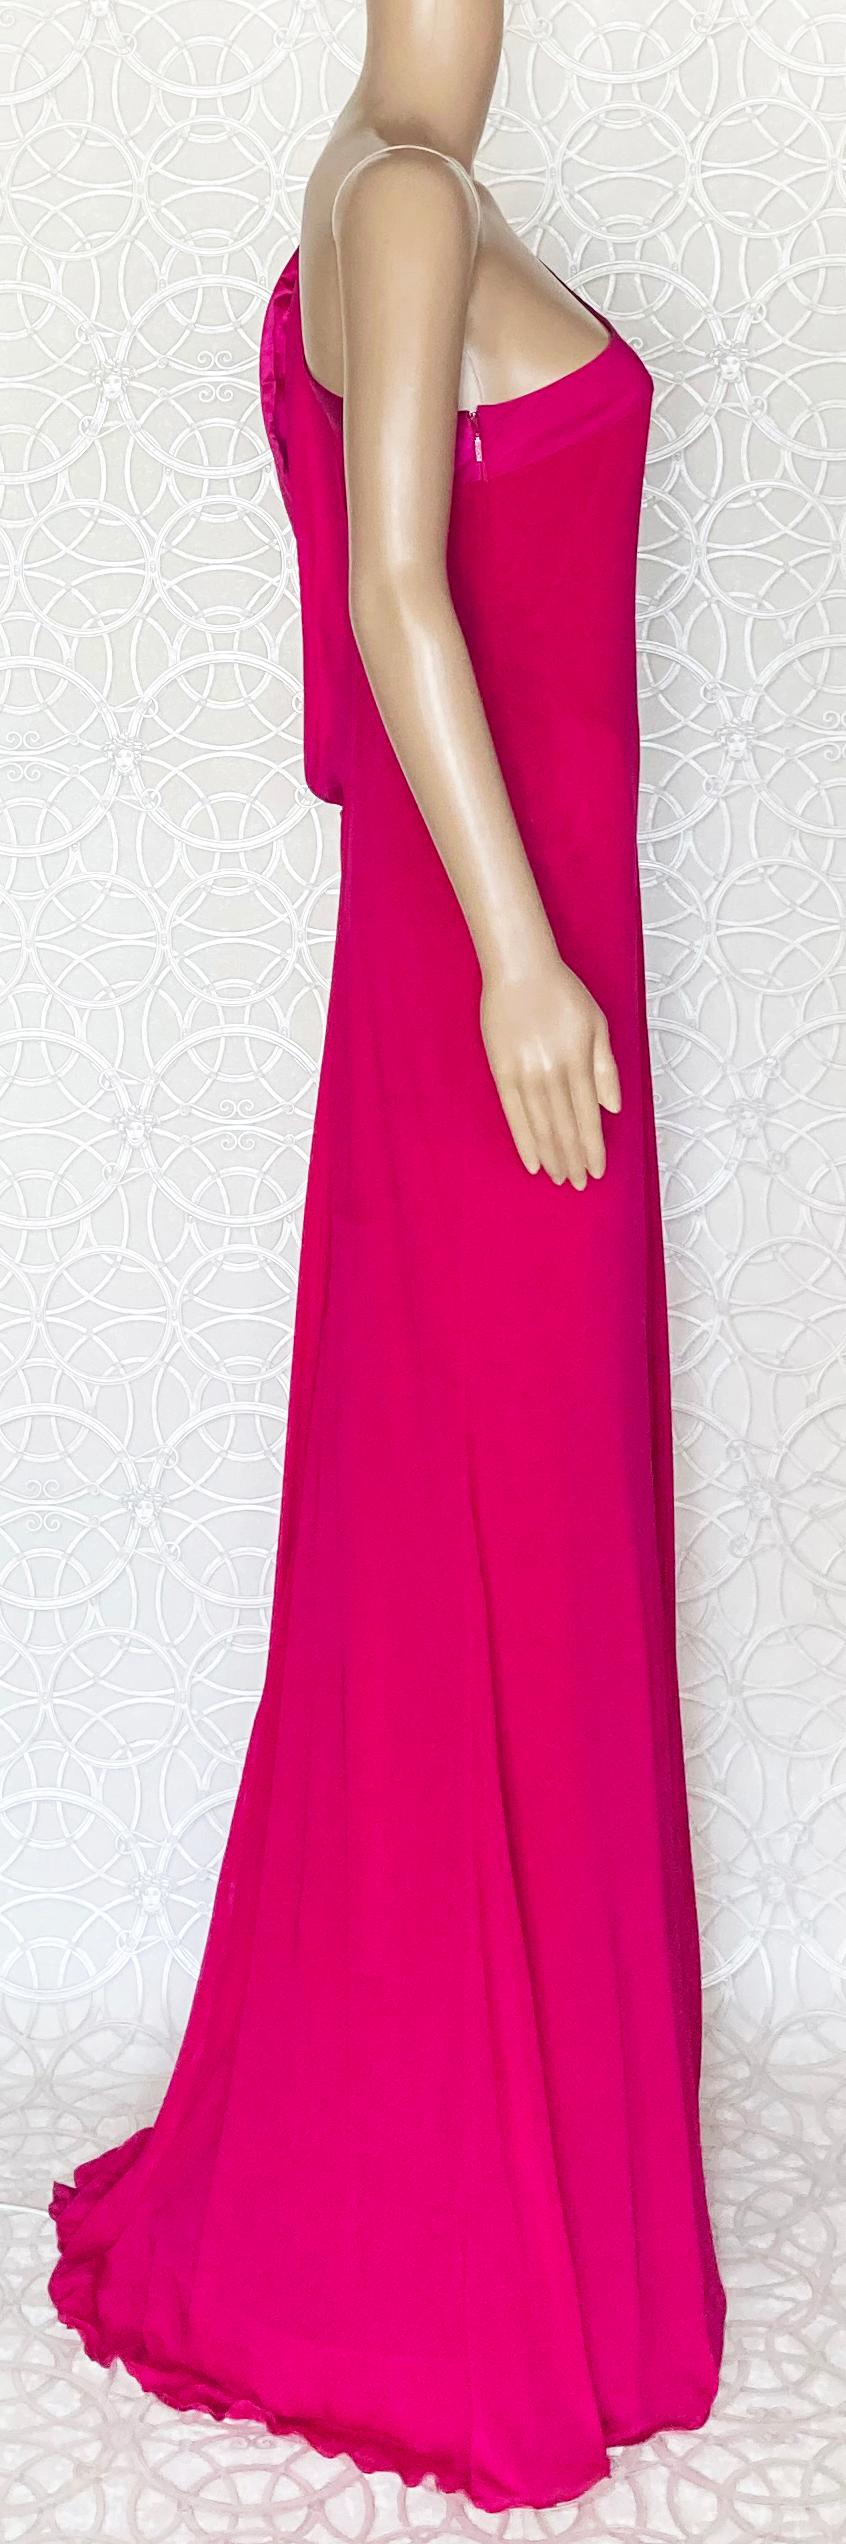 NEW VERSACE FUCHSIA SILK ONE SHOULDER OPEN BACK Gown 44 - 8 For Sale 3